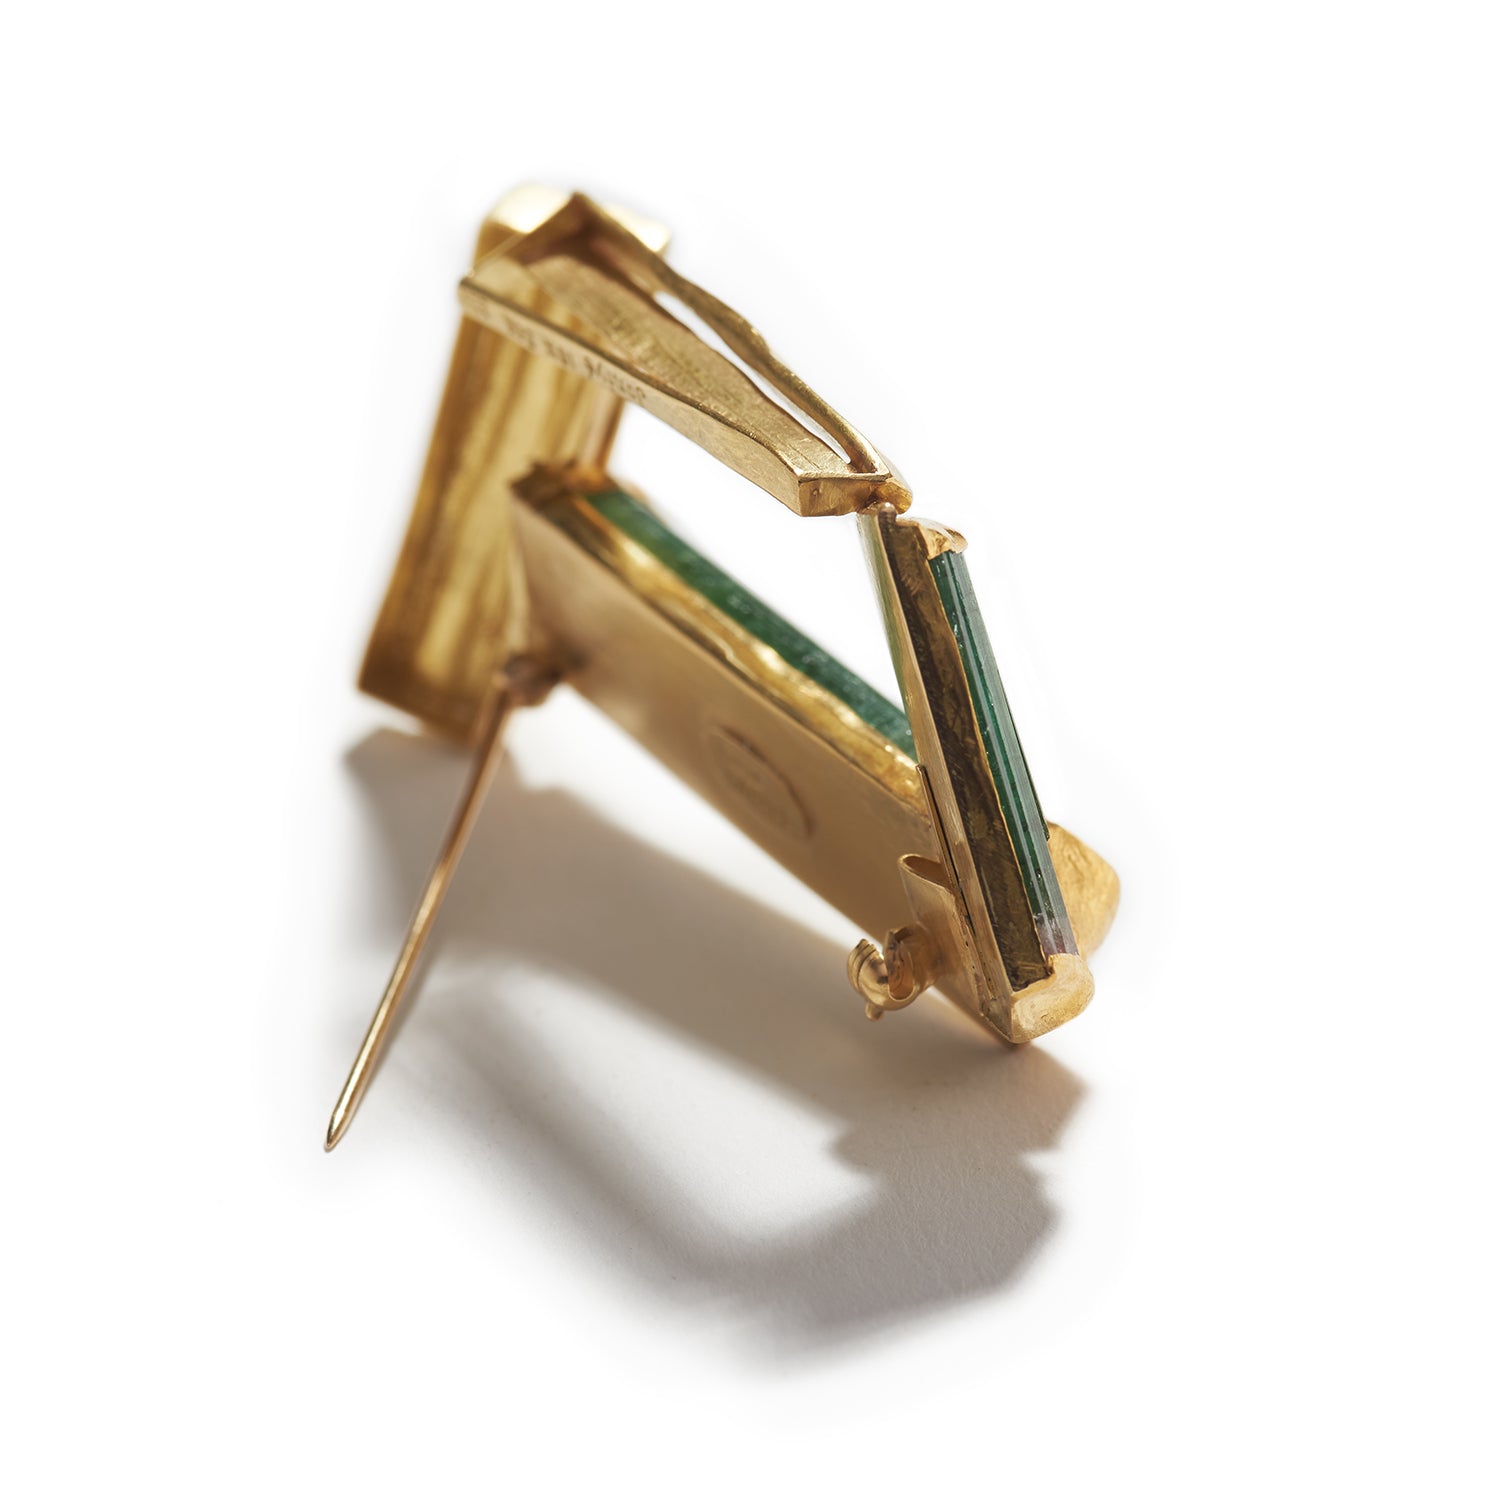 Tourmaline Brooch with Gold